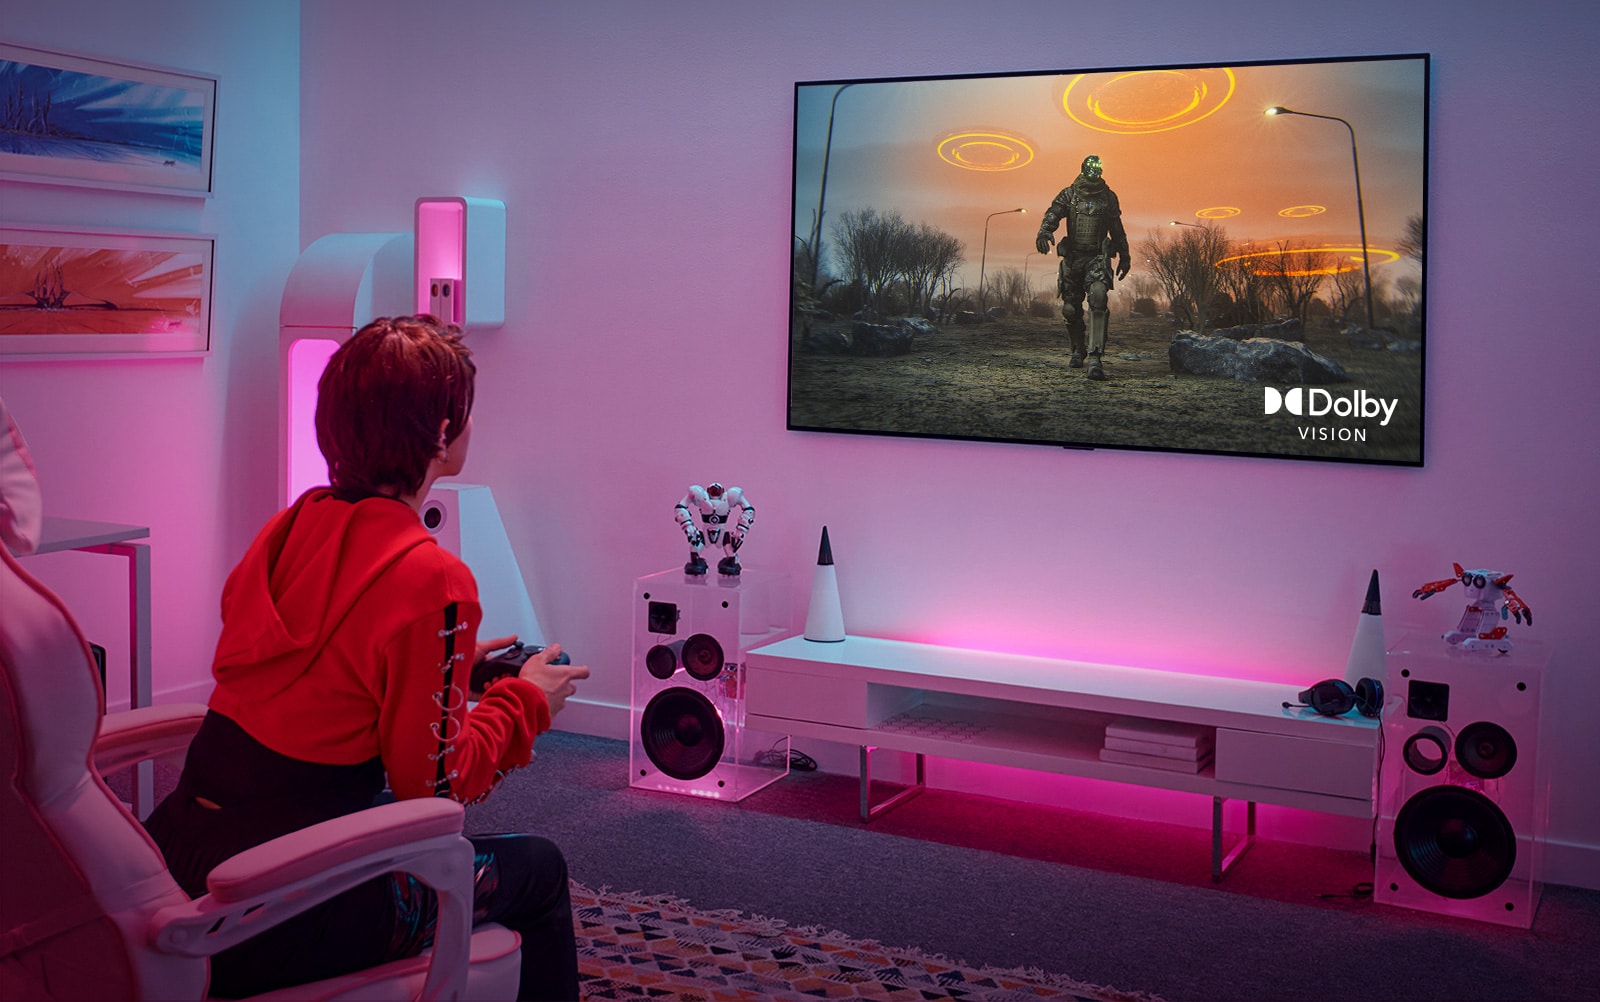 Image showing a gamer playing on an LG TV in a pink-lit living room